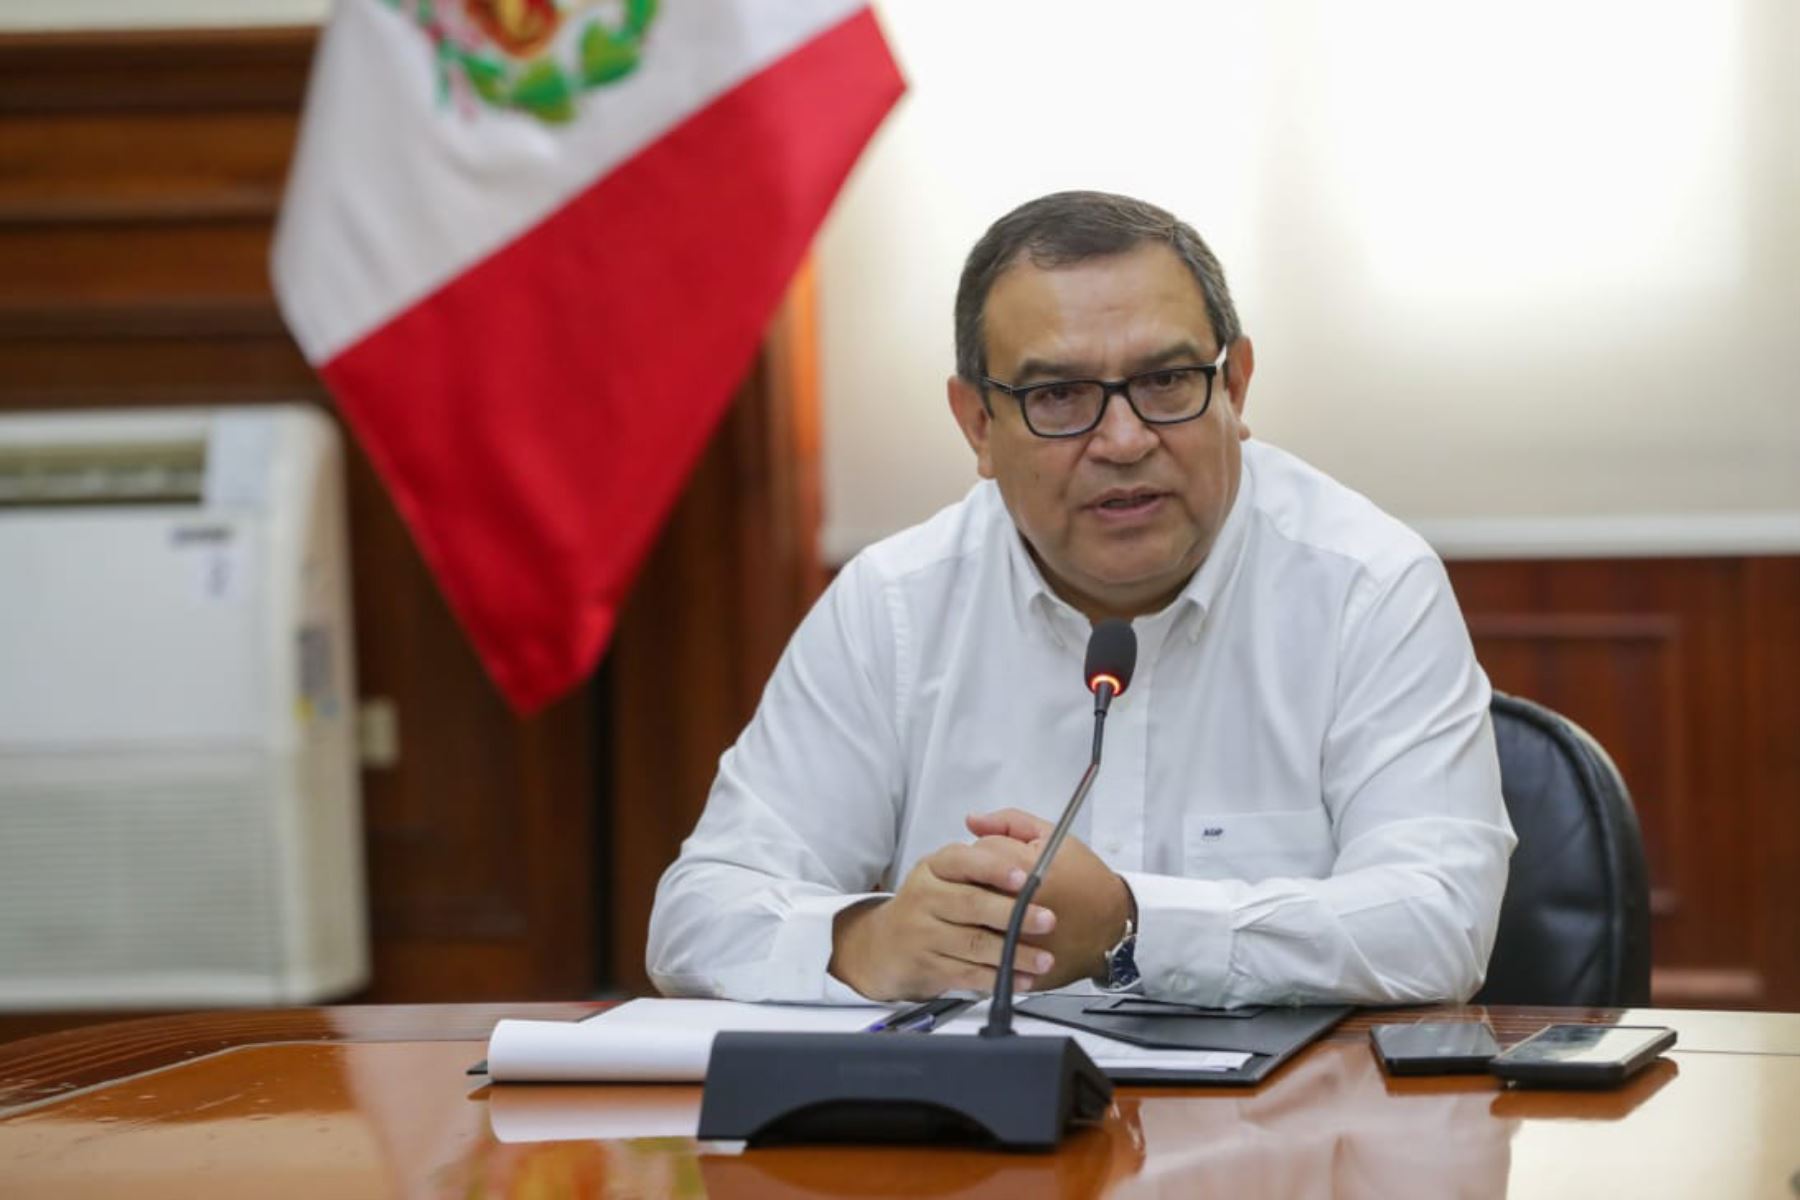 Peru's PM meets with head of Authority for Reconstruction with Changes